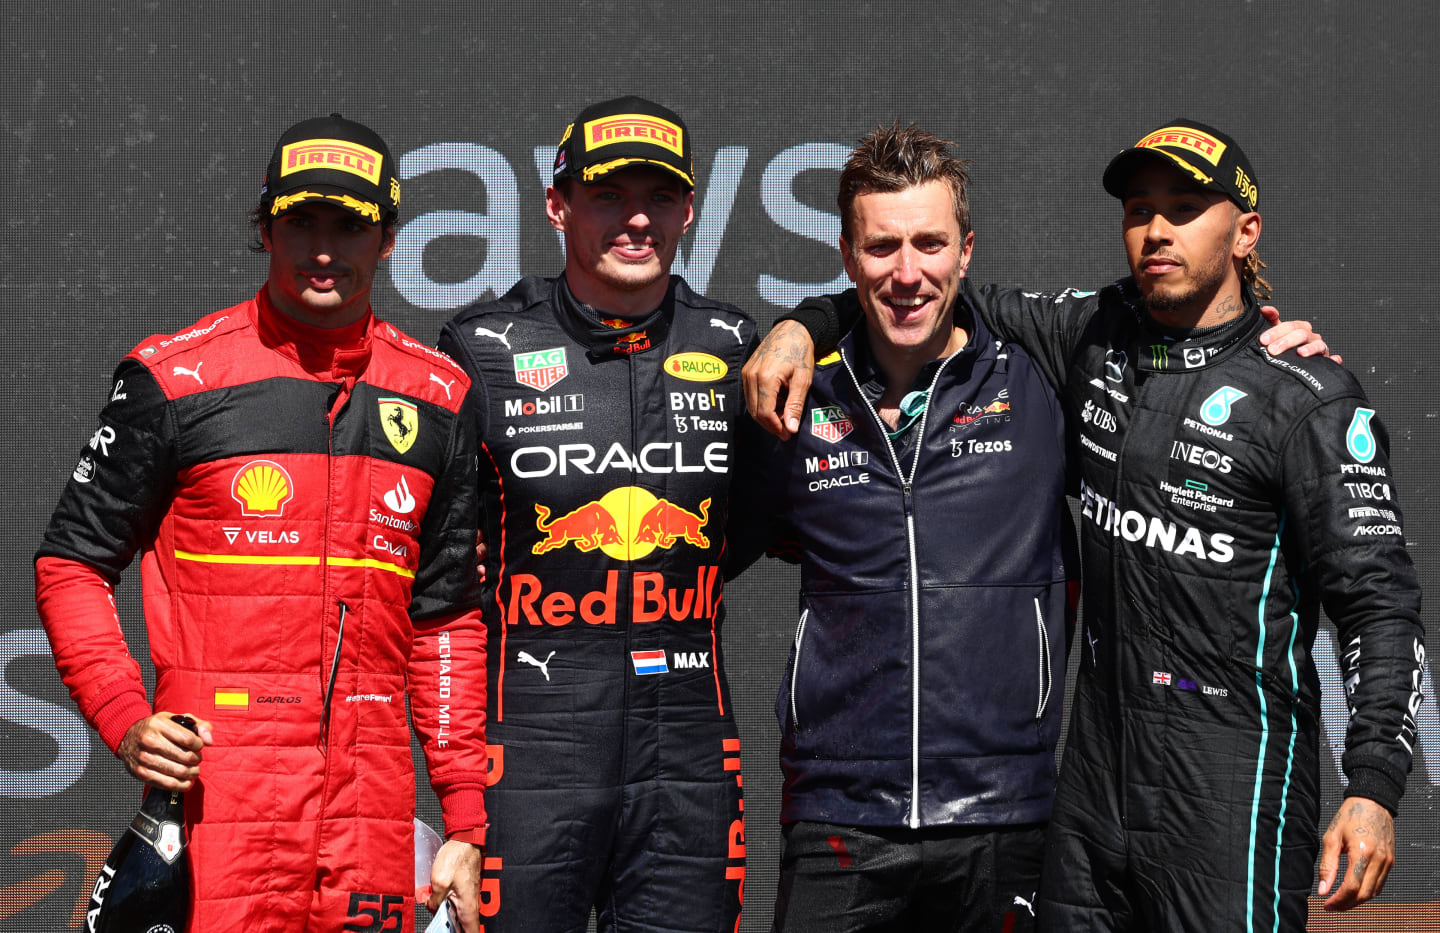 MONTREAL, QUEBEC - JUNE 19: Race winner Max Verstappen of the Netherlands and Oracle Red Bull Racing (second from left), Second placed Carlos Sainz of Spain and Ferrari (L), Third placed Lewis Hamilton of Great Britain and Mercedes (R) and Ben Gordon-Smith of Red Bull Racing (second from right) celebrate on the podium during the F1 Grand Prix of Canada at Circuit Gilles Villeneuve on June 19, 2022 in Montreal, Quebec. (Photo by Clive Rose/Getty Images)